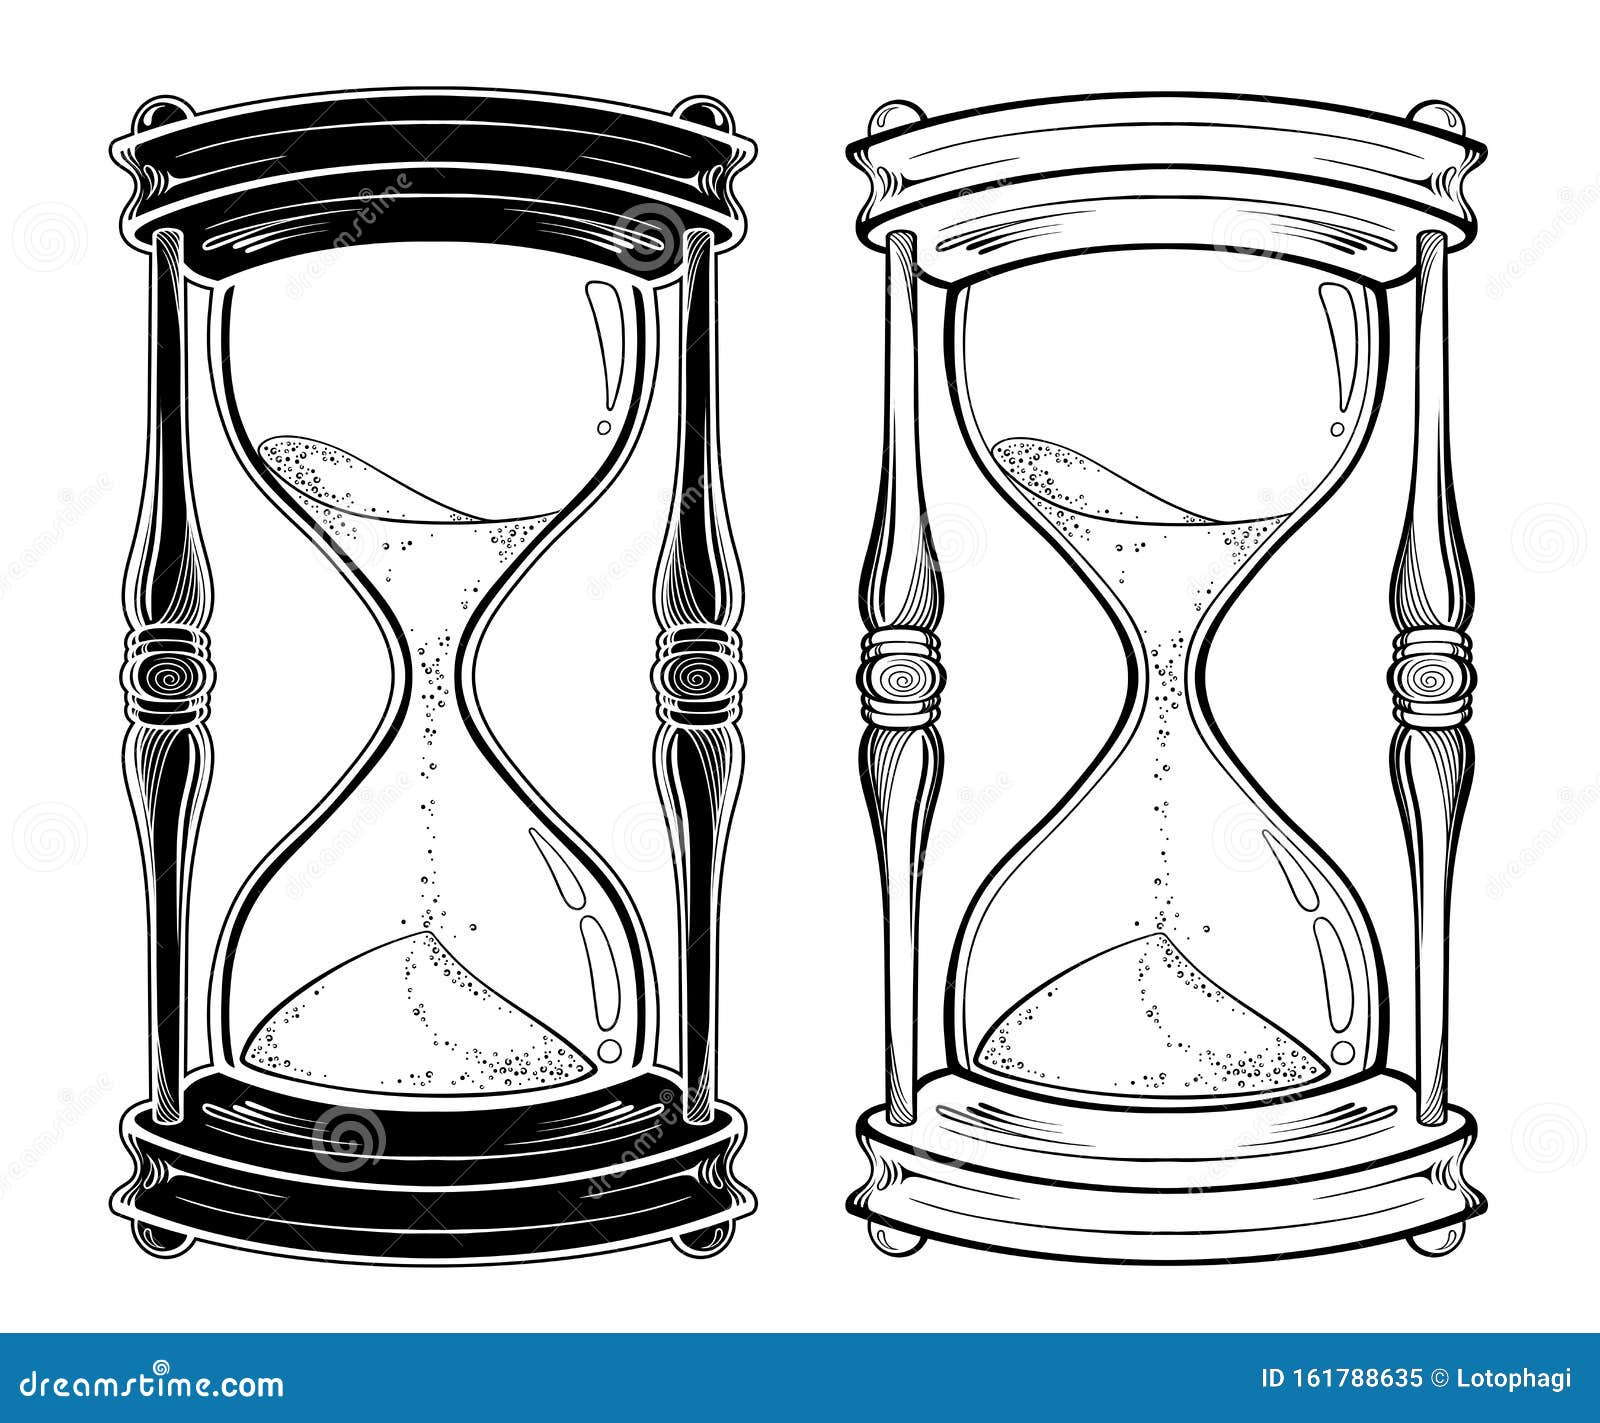 Hourglass Tattoo Vector Images over 140